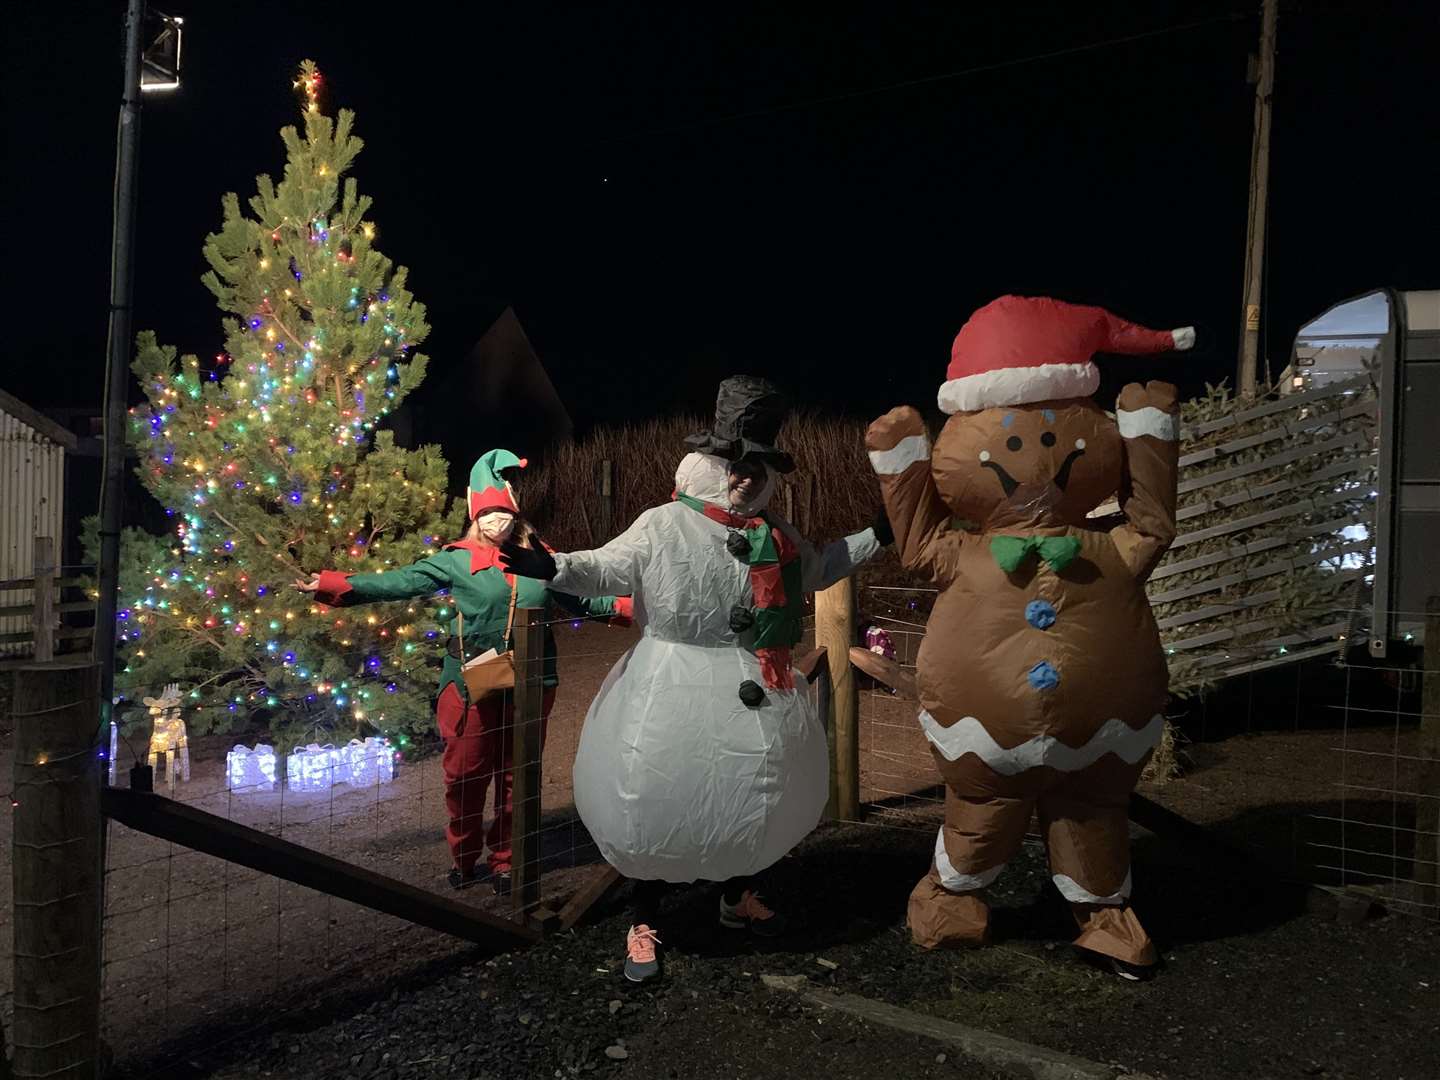 As well as Santa and his elves, there was also a gingerbread man, snowman and turkey.